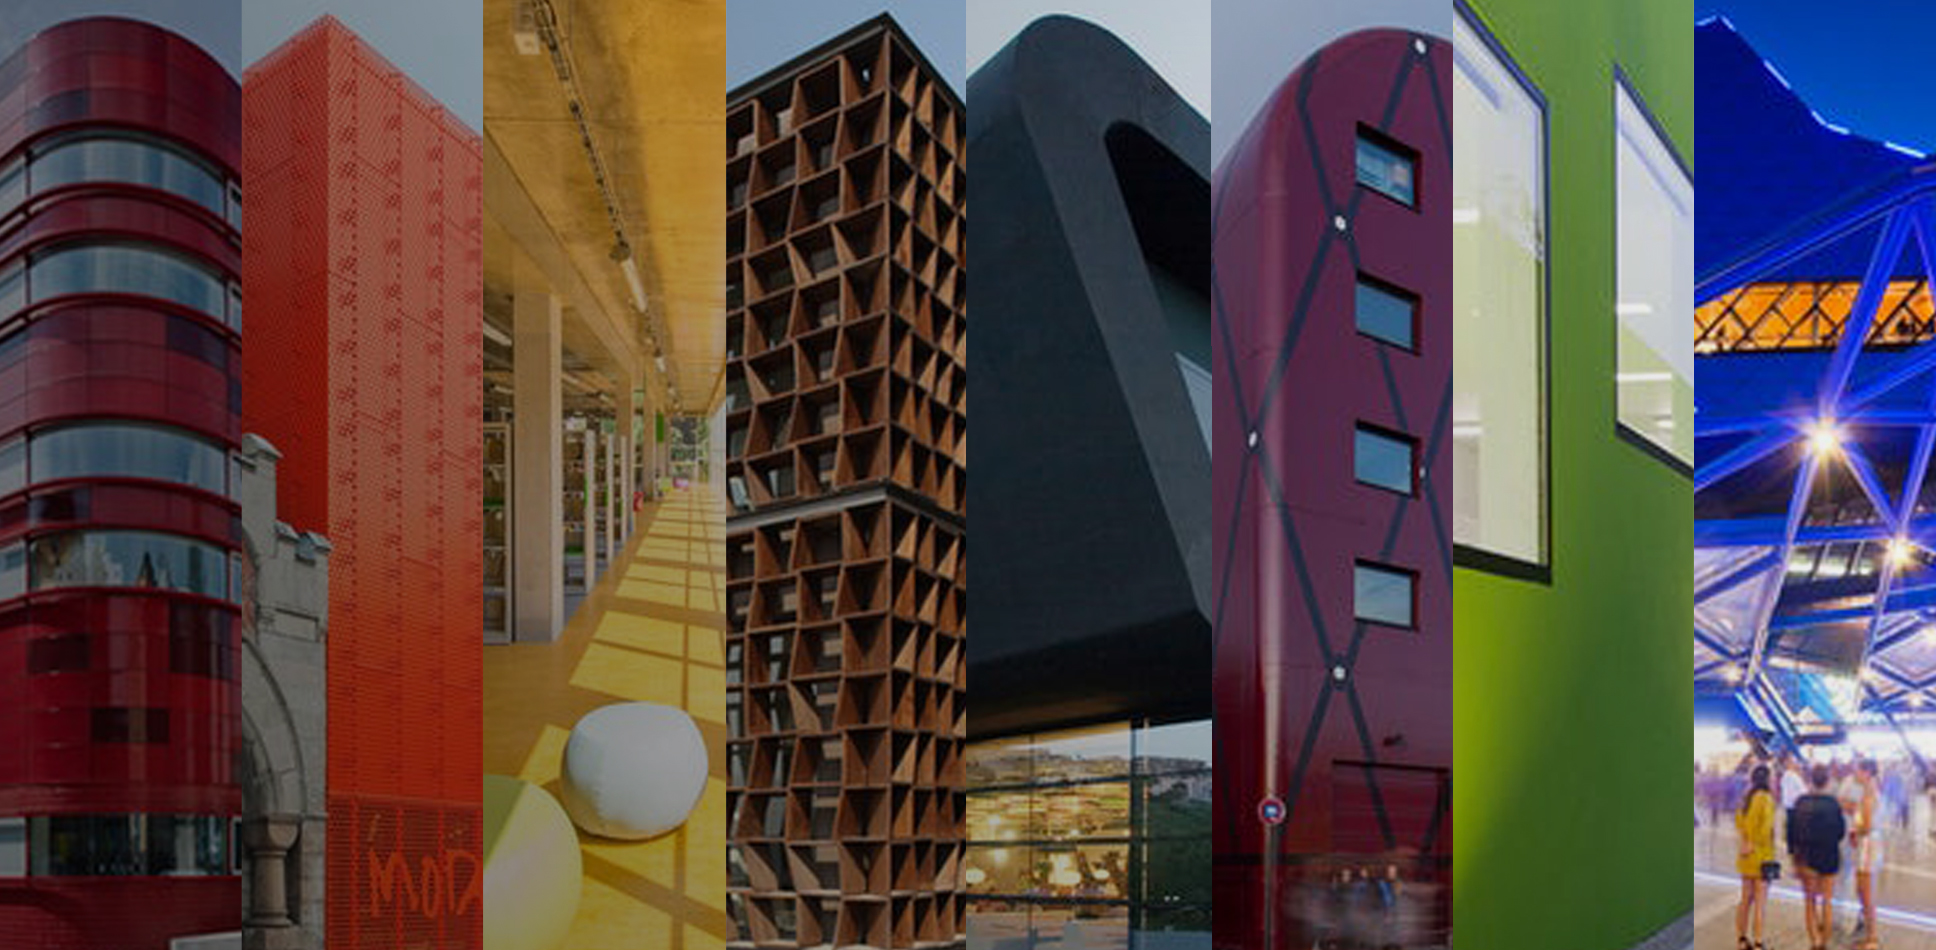 The Color of Architecture: 72 Projects Spanning the Spectrum